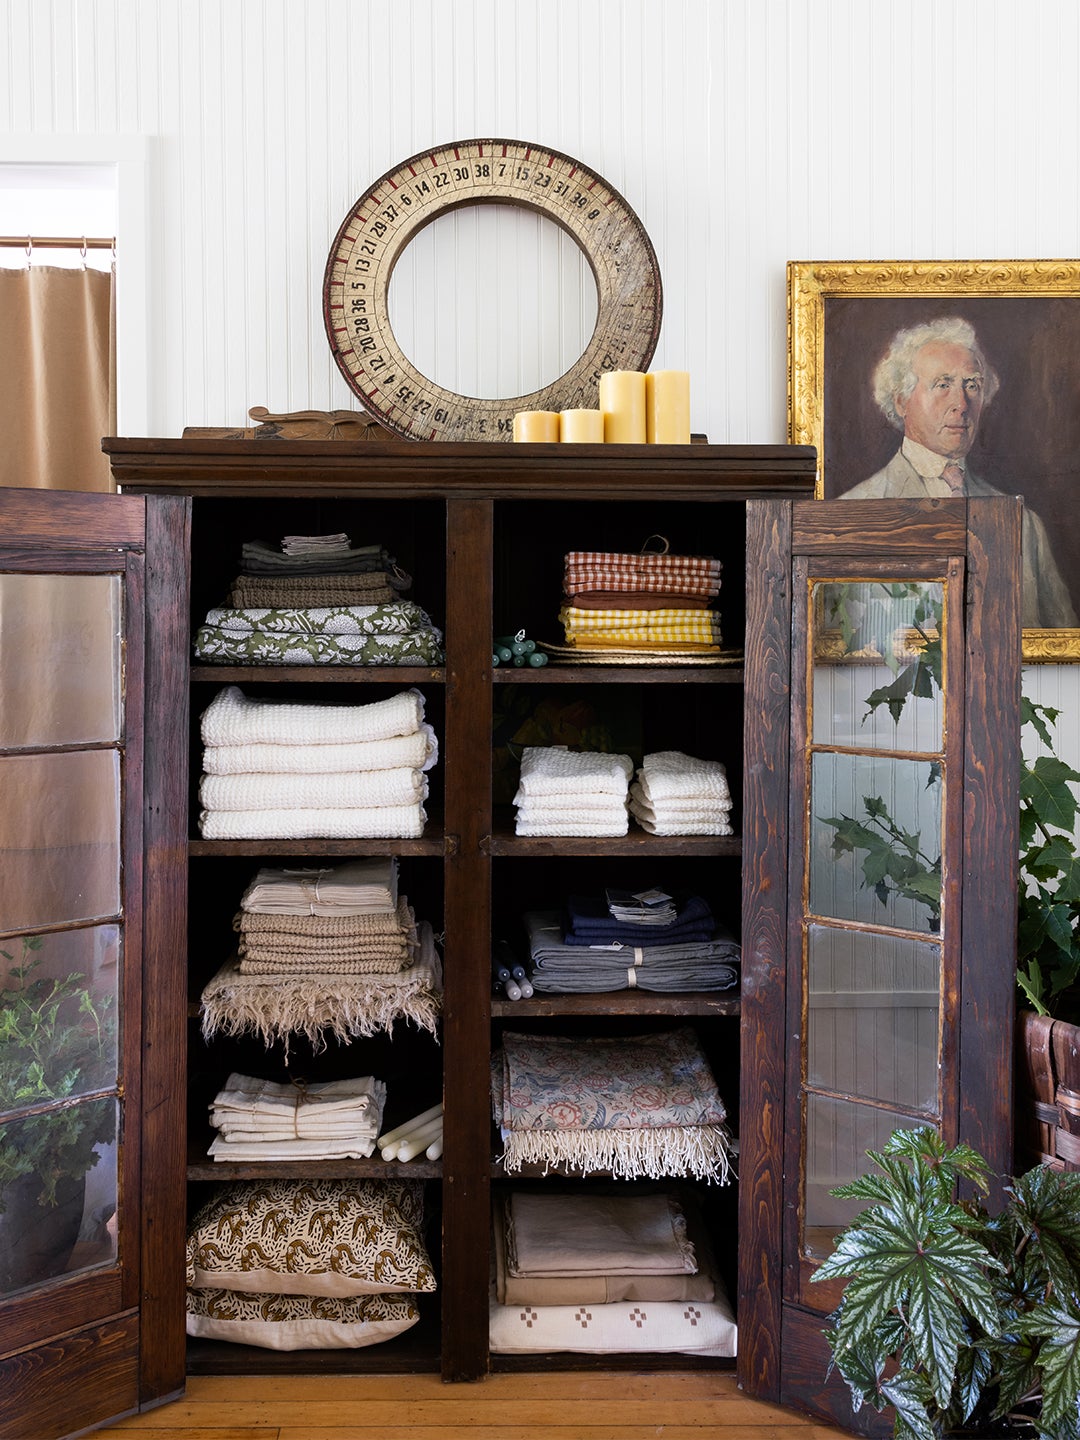 This Northern Michigan Antiques Shop Is Like a  “Curiosity Cabinet Come to Life”